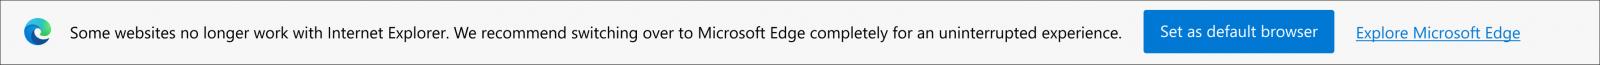 Prompt to make Microsoft Edge the default browser